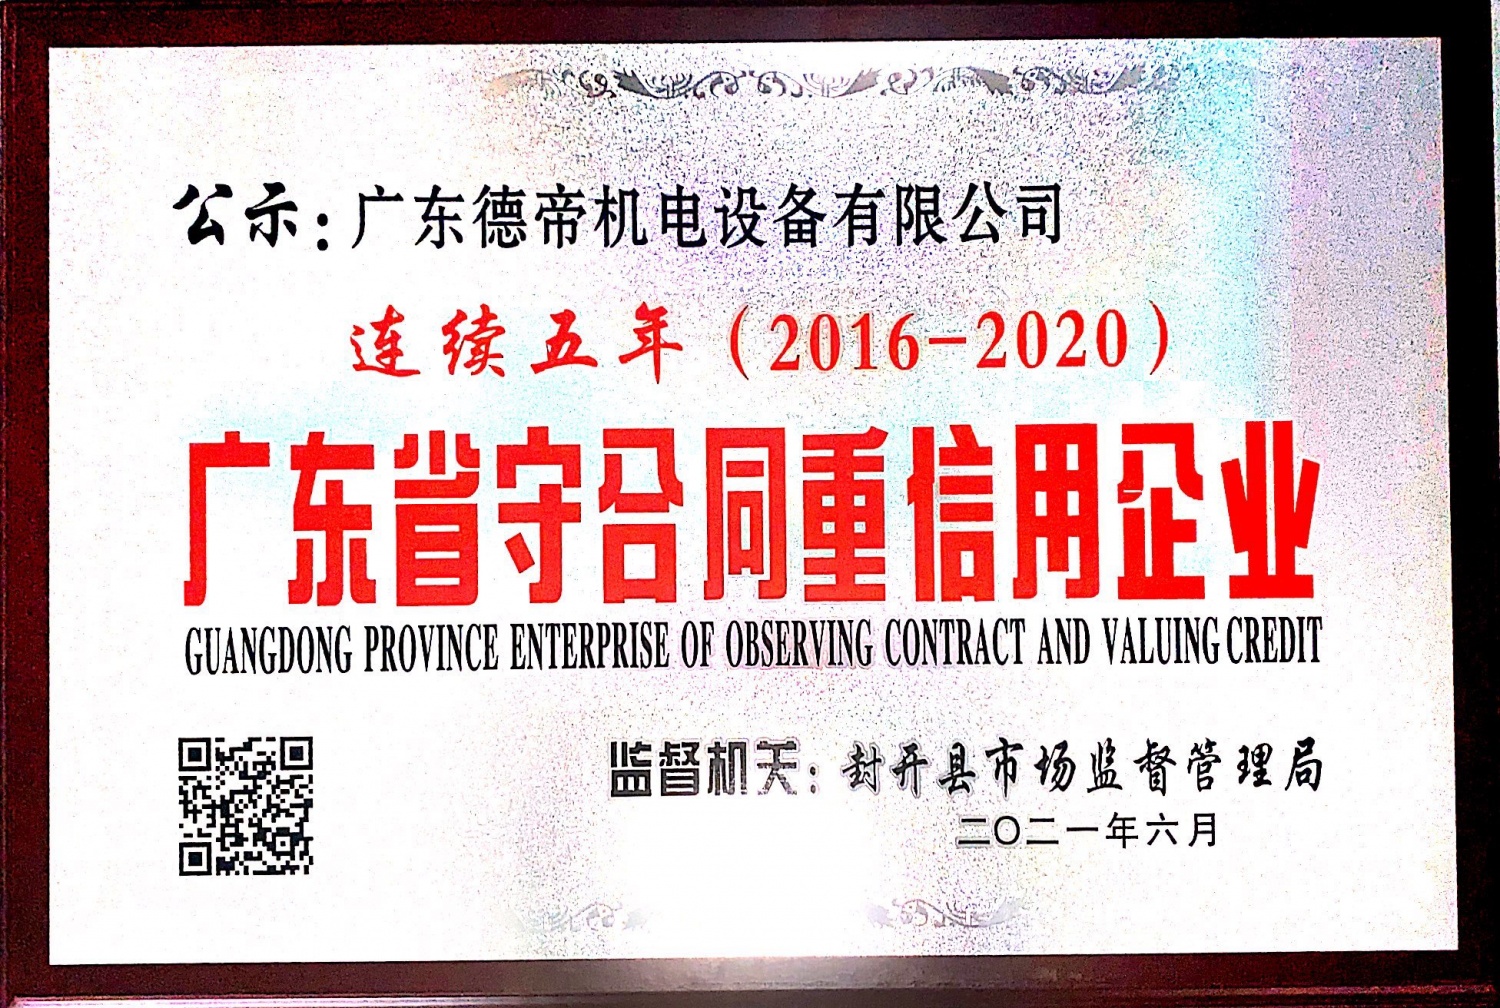 2016-2020 Guangdong Province Contract abiding and Trustworthy Enterprise